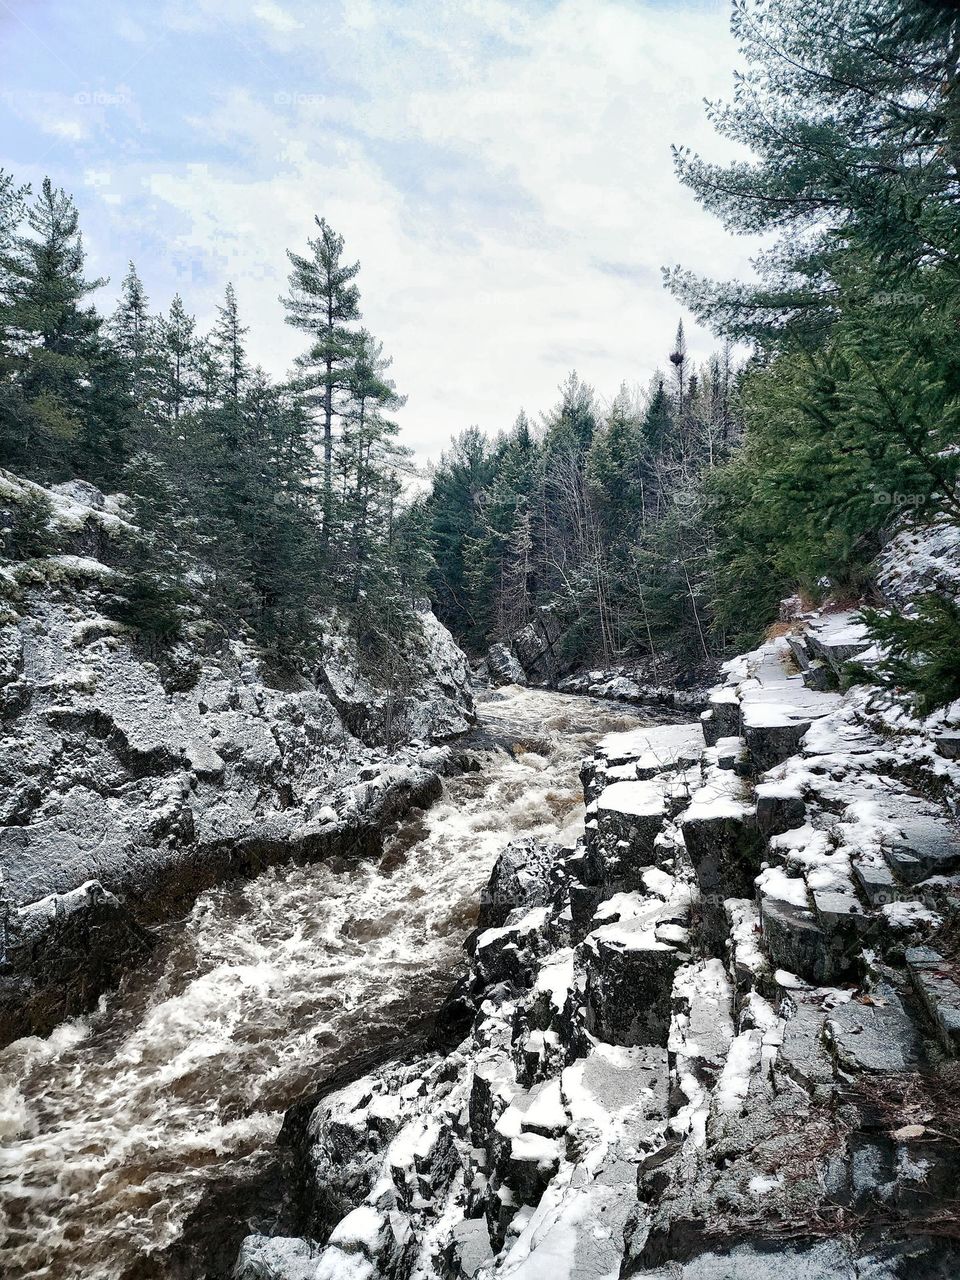 A winter landscape: snow-covered cliffs surrounding a raging river.